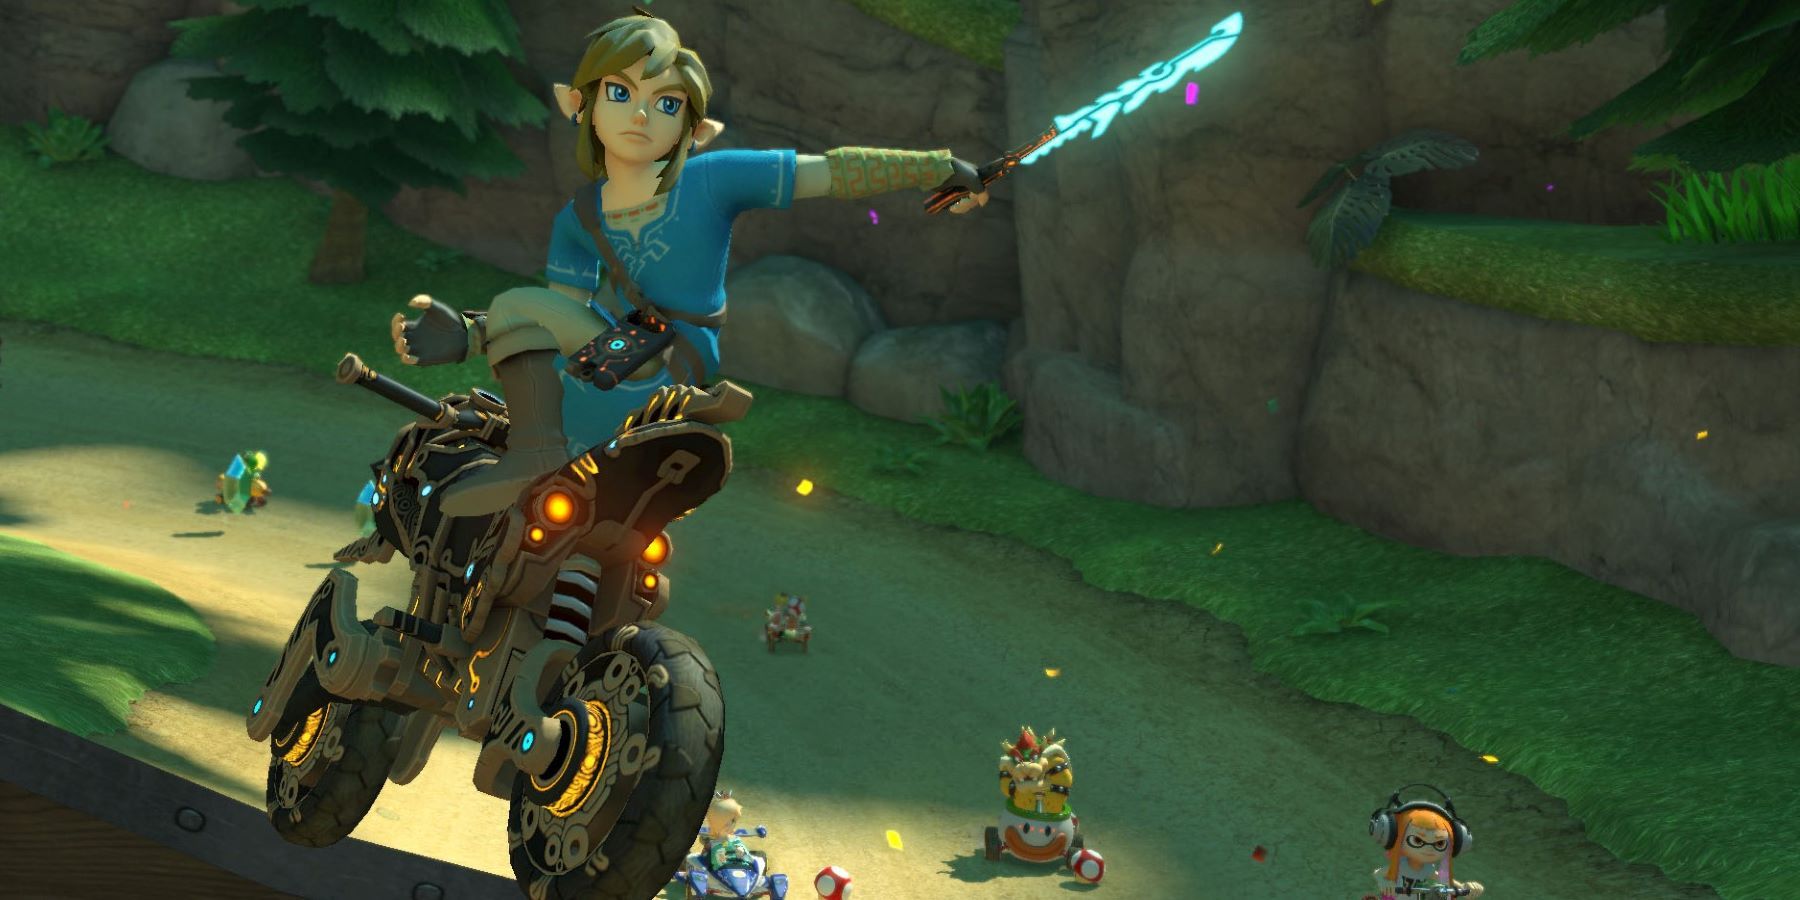 Link holding a Guardian Sword in a Mario Kart 8 Deluxe race, with Rosalina, Bowser, and an Inkling in the background